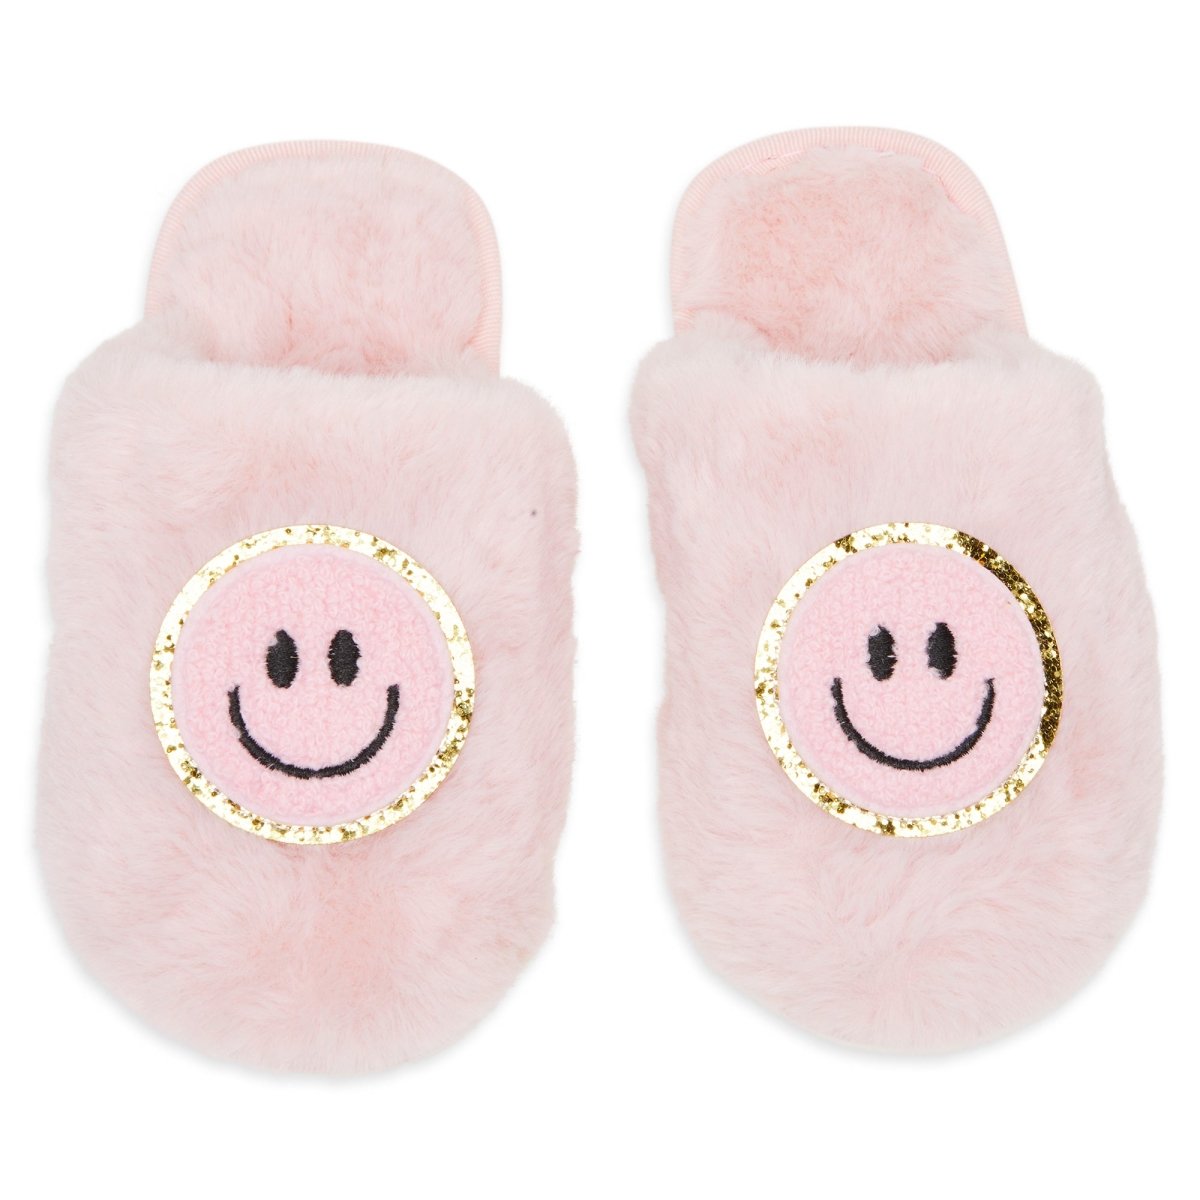 CALI SMILEY FACE FUZZY SLIPPERS (PREORDER) - MINI DREAMERS